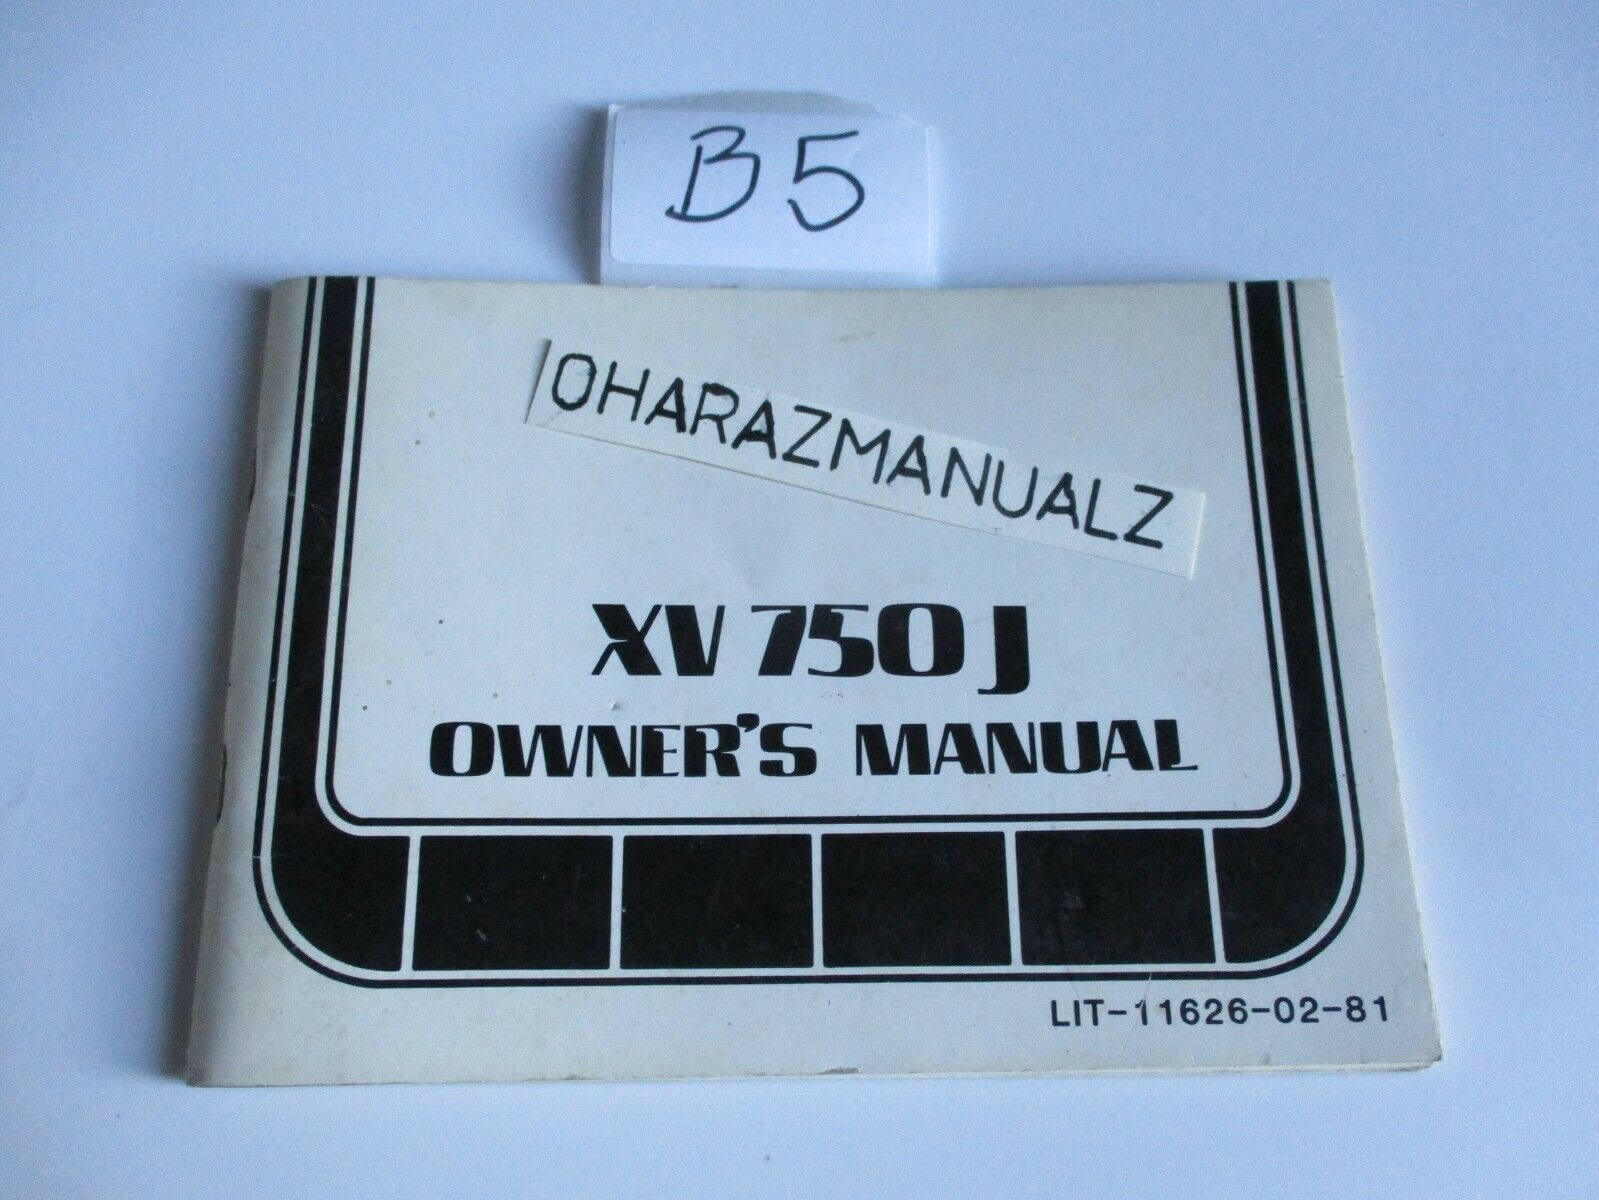 Yamaha Xv750j Owners Owner Owner's Manual